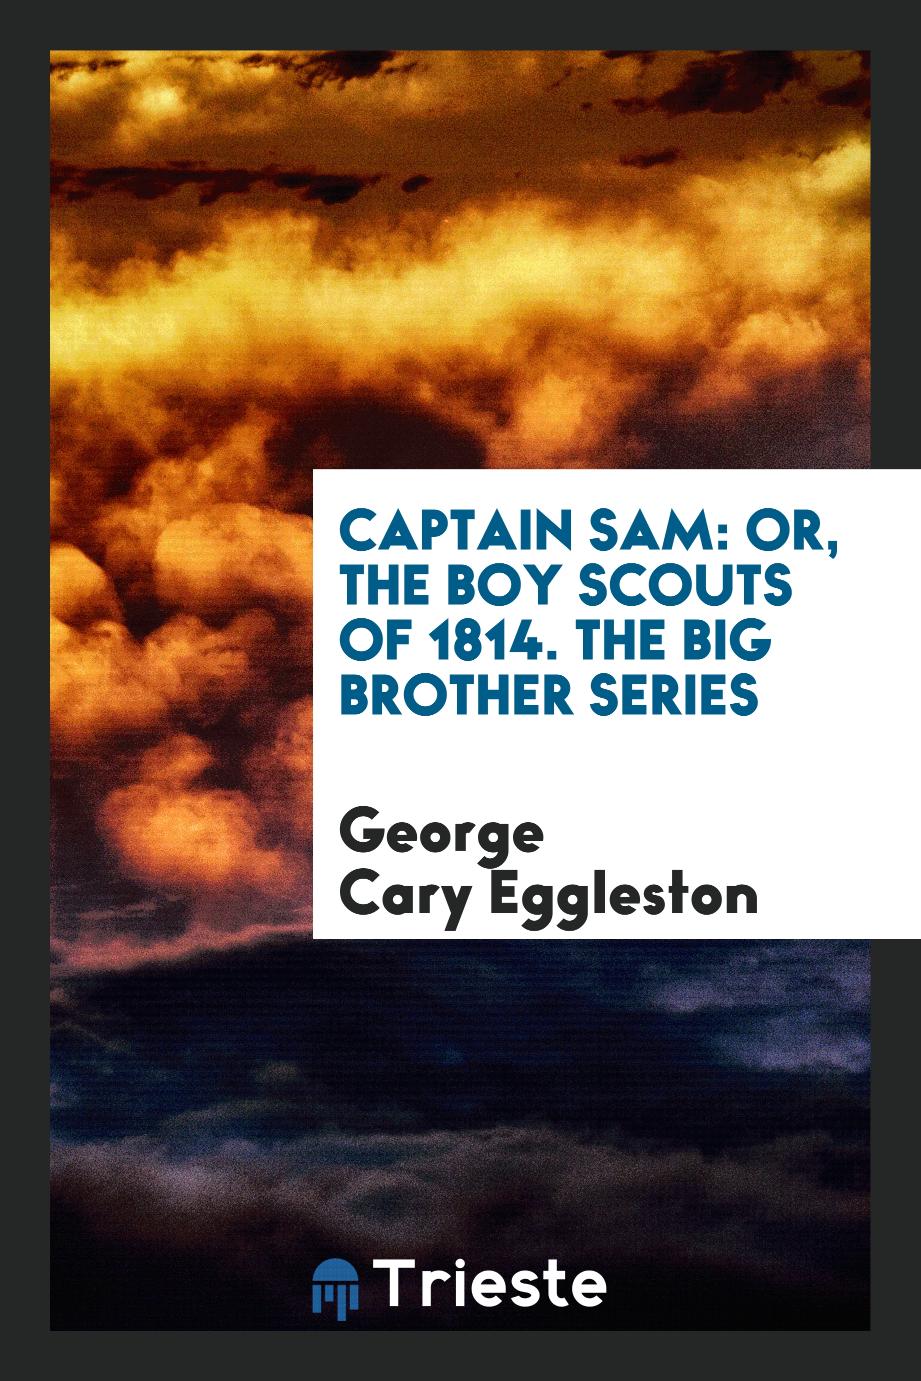 Captain Sam: Or, the Boy Scouts of 1814. The Big Brother Series